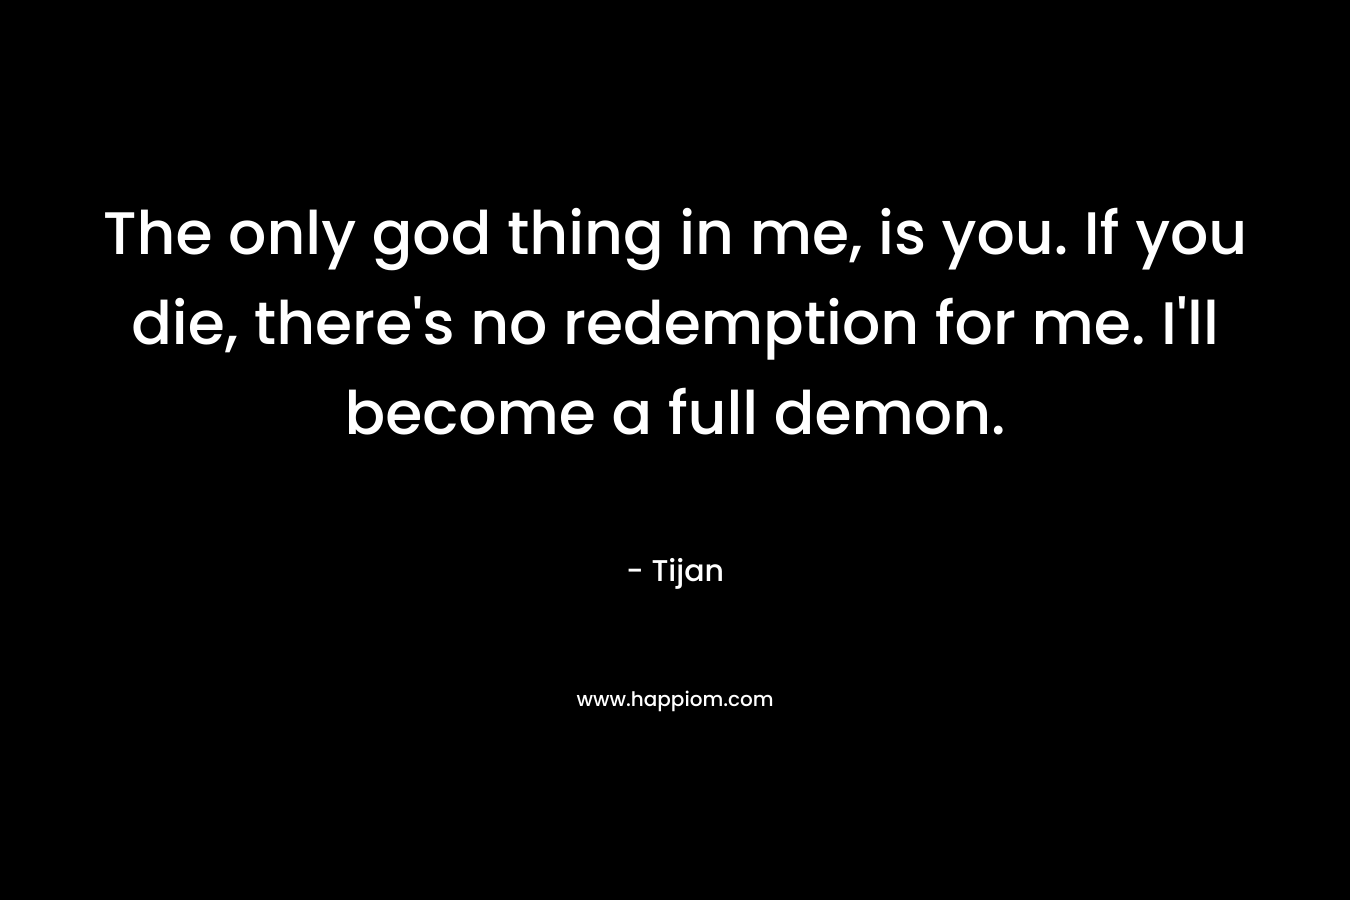 The only god thing in me, is you. If you die, there’s no redemption for me. I’ll become a full demon. – Tijan